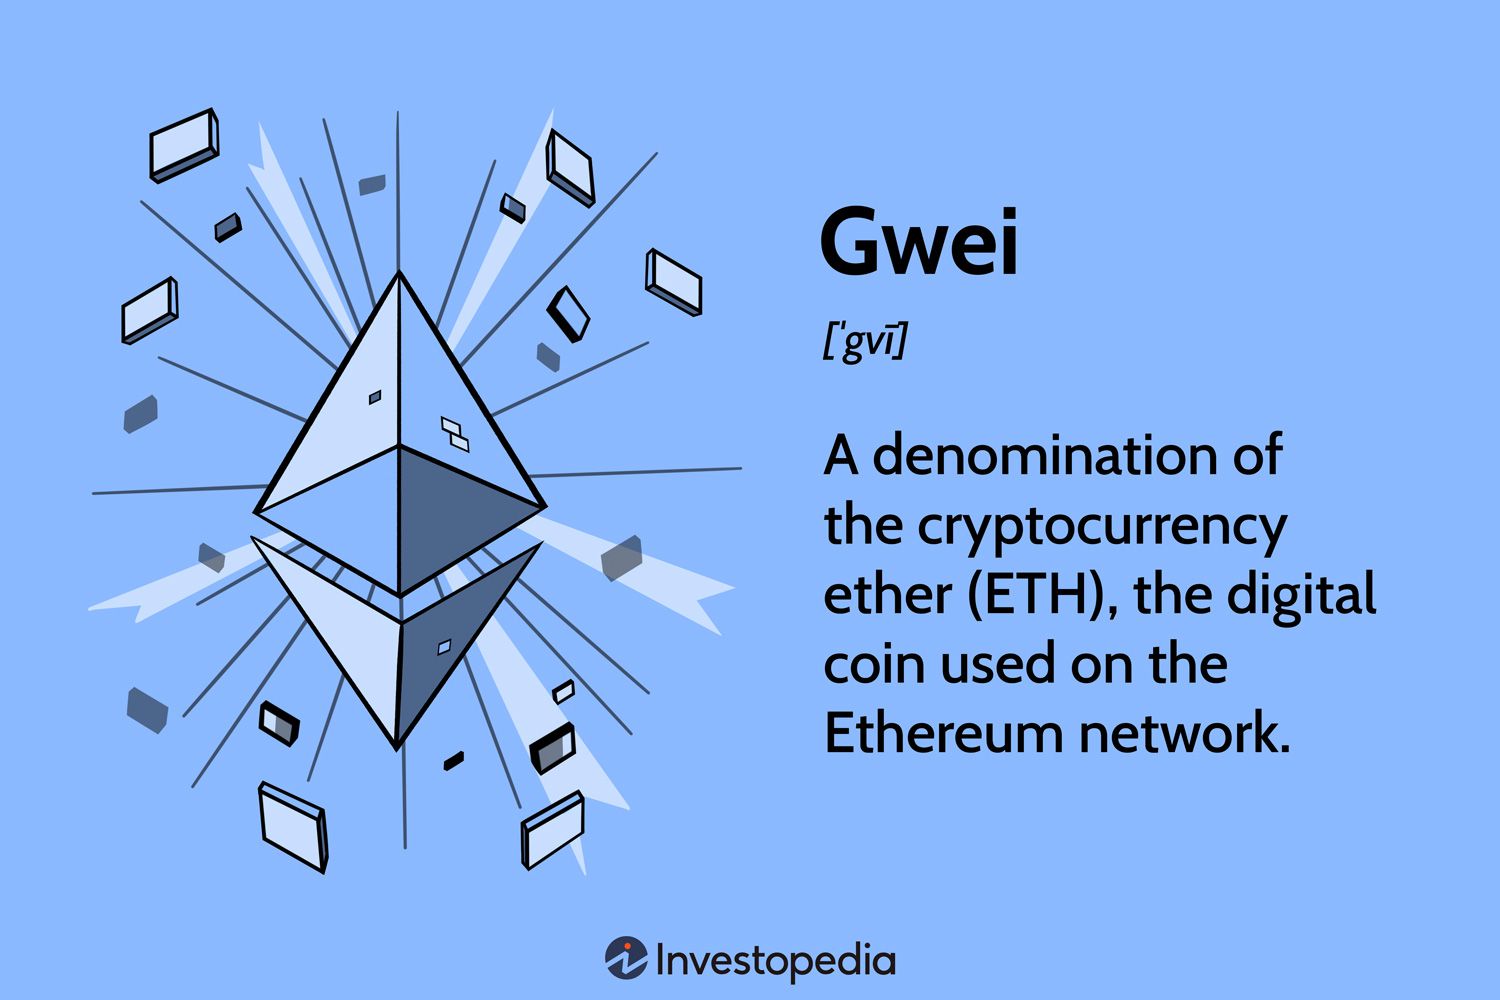 What Is Gwei? The Cryptocurrency Explained